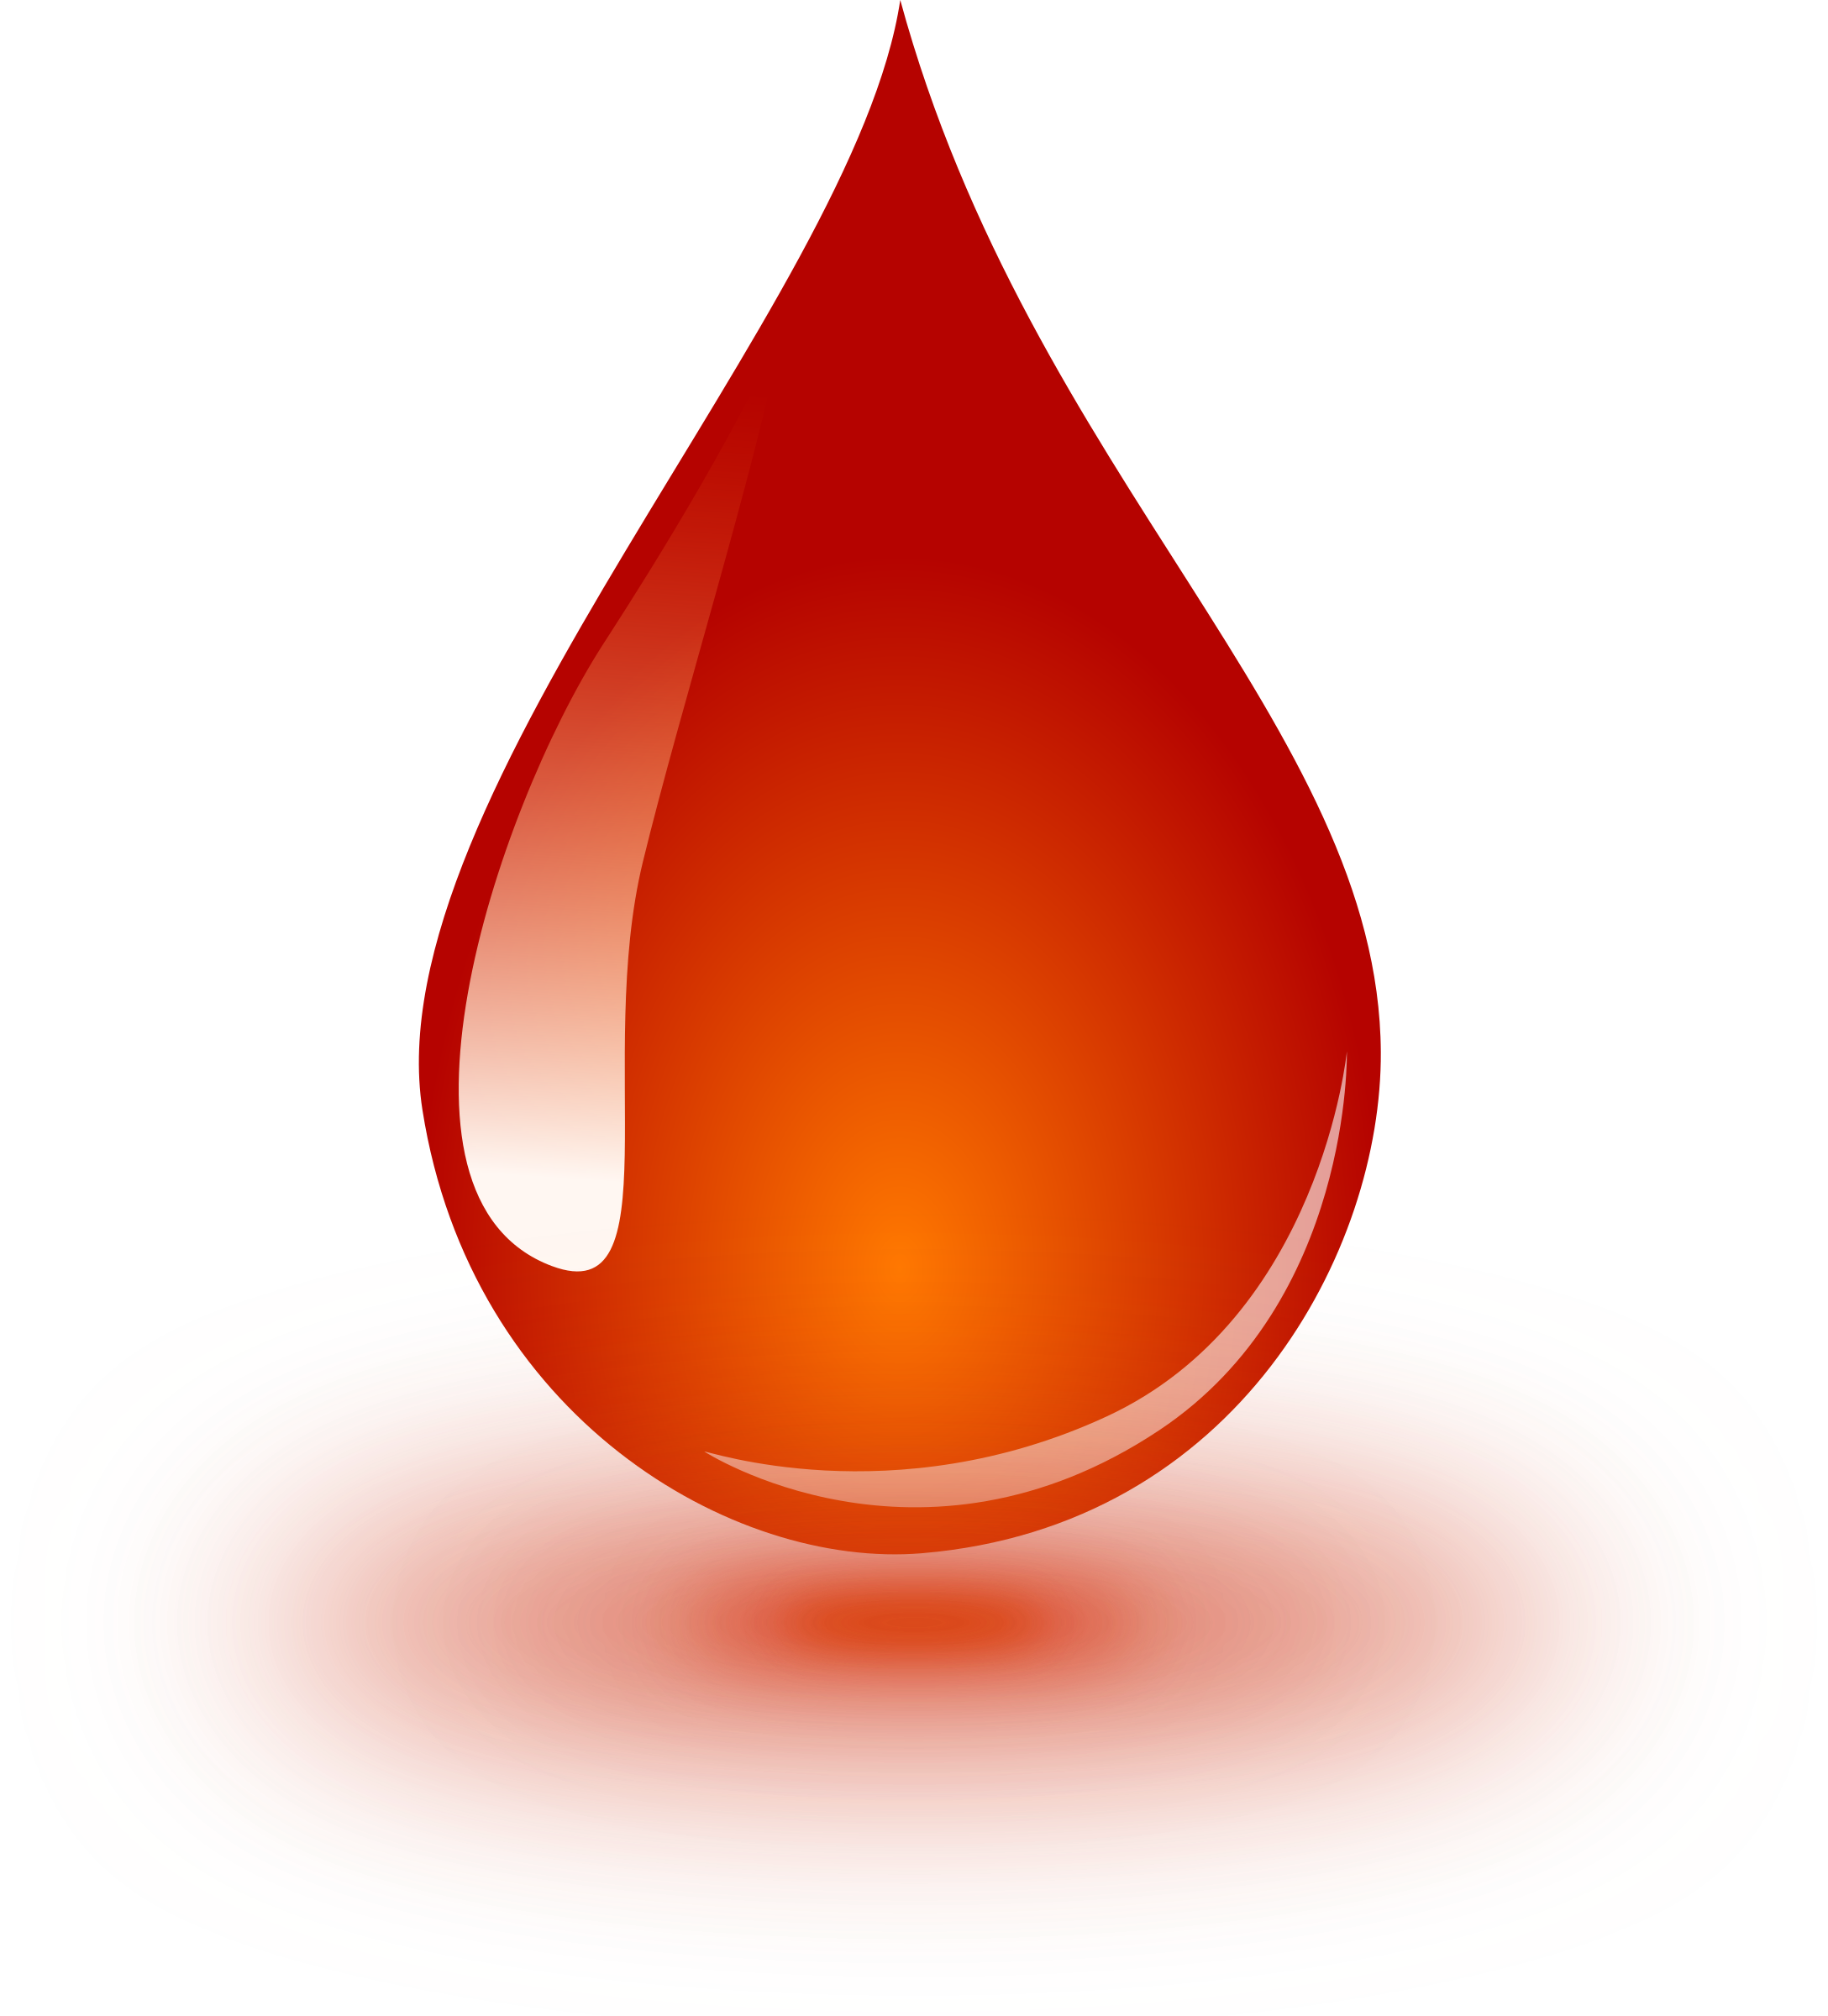 blood clipart picture - photo #14